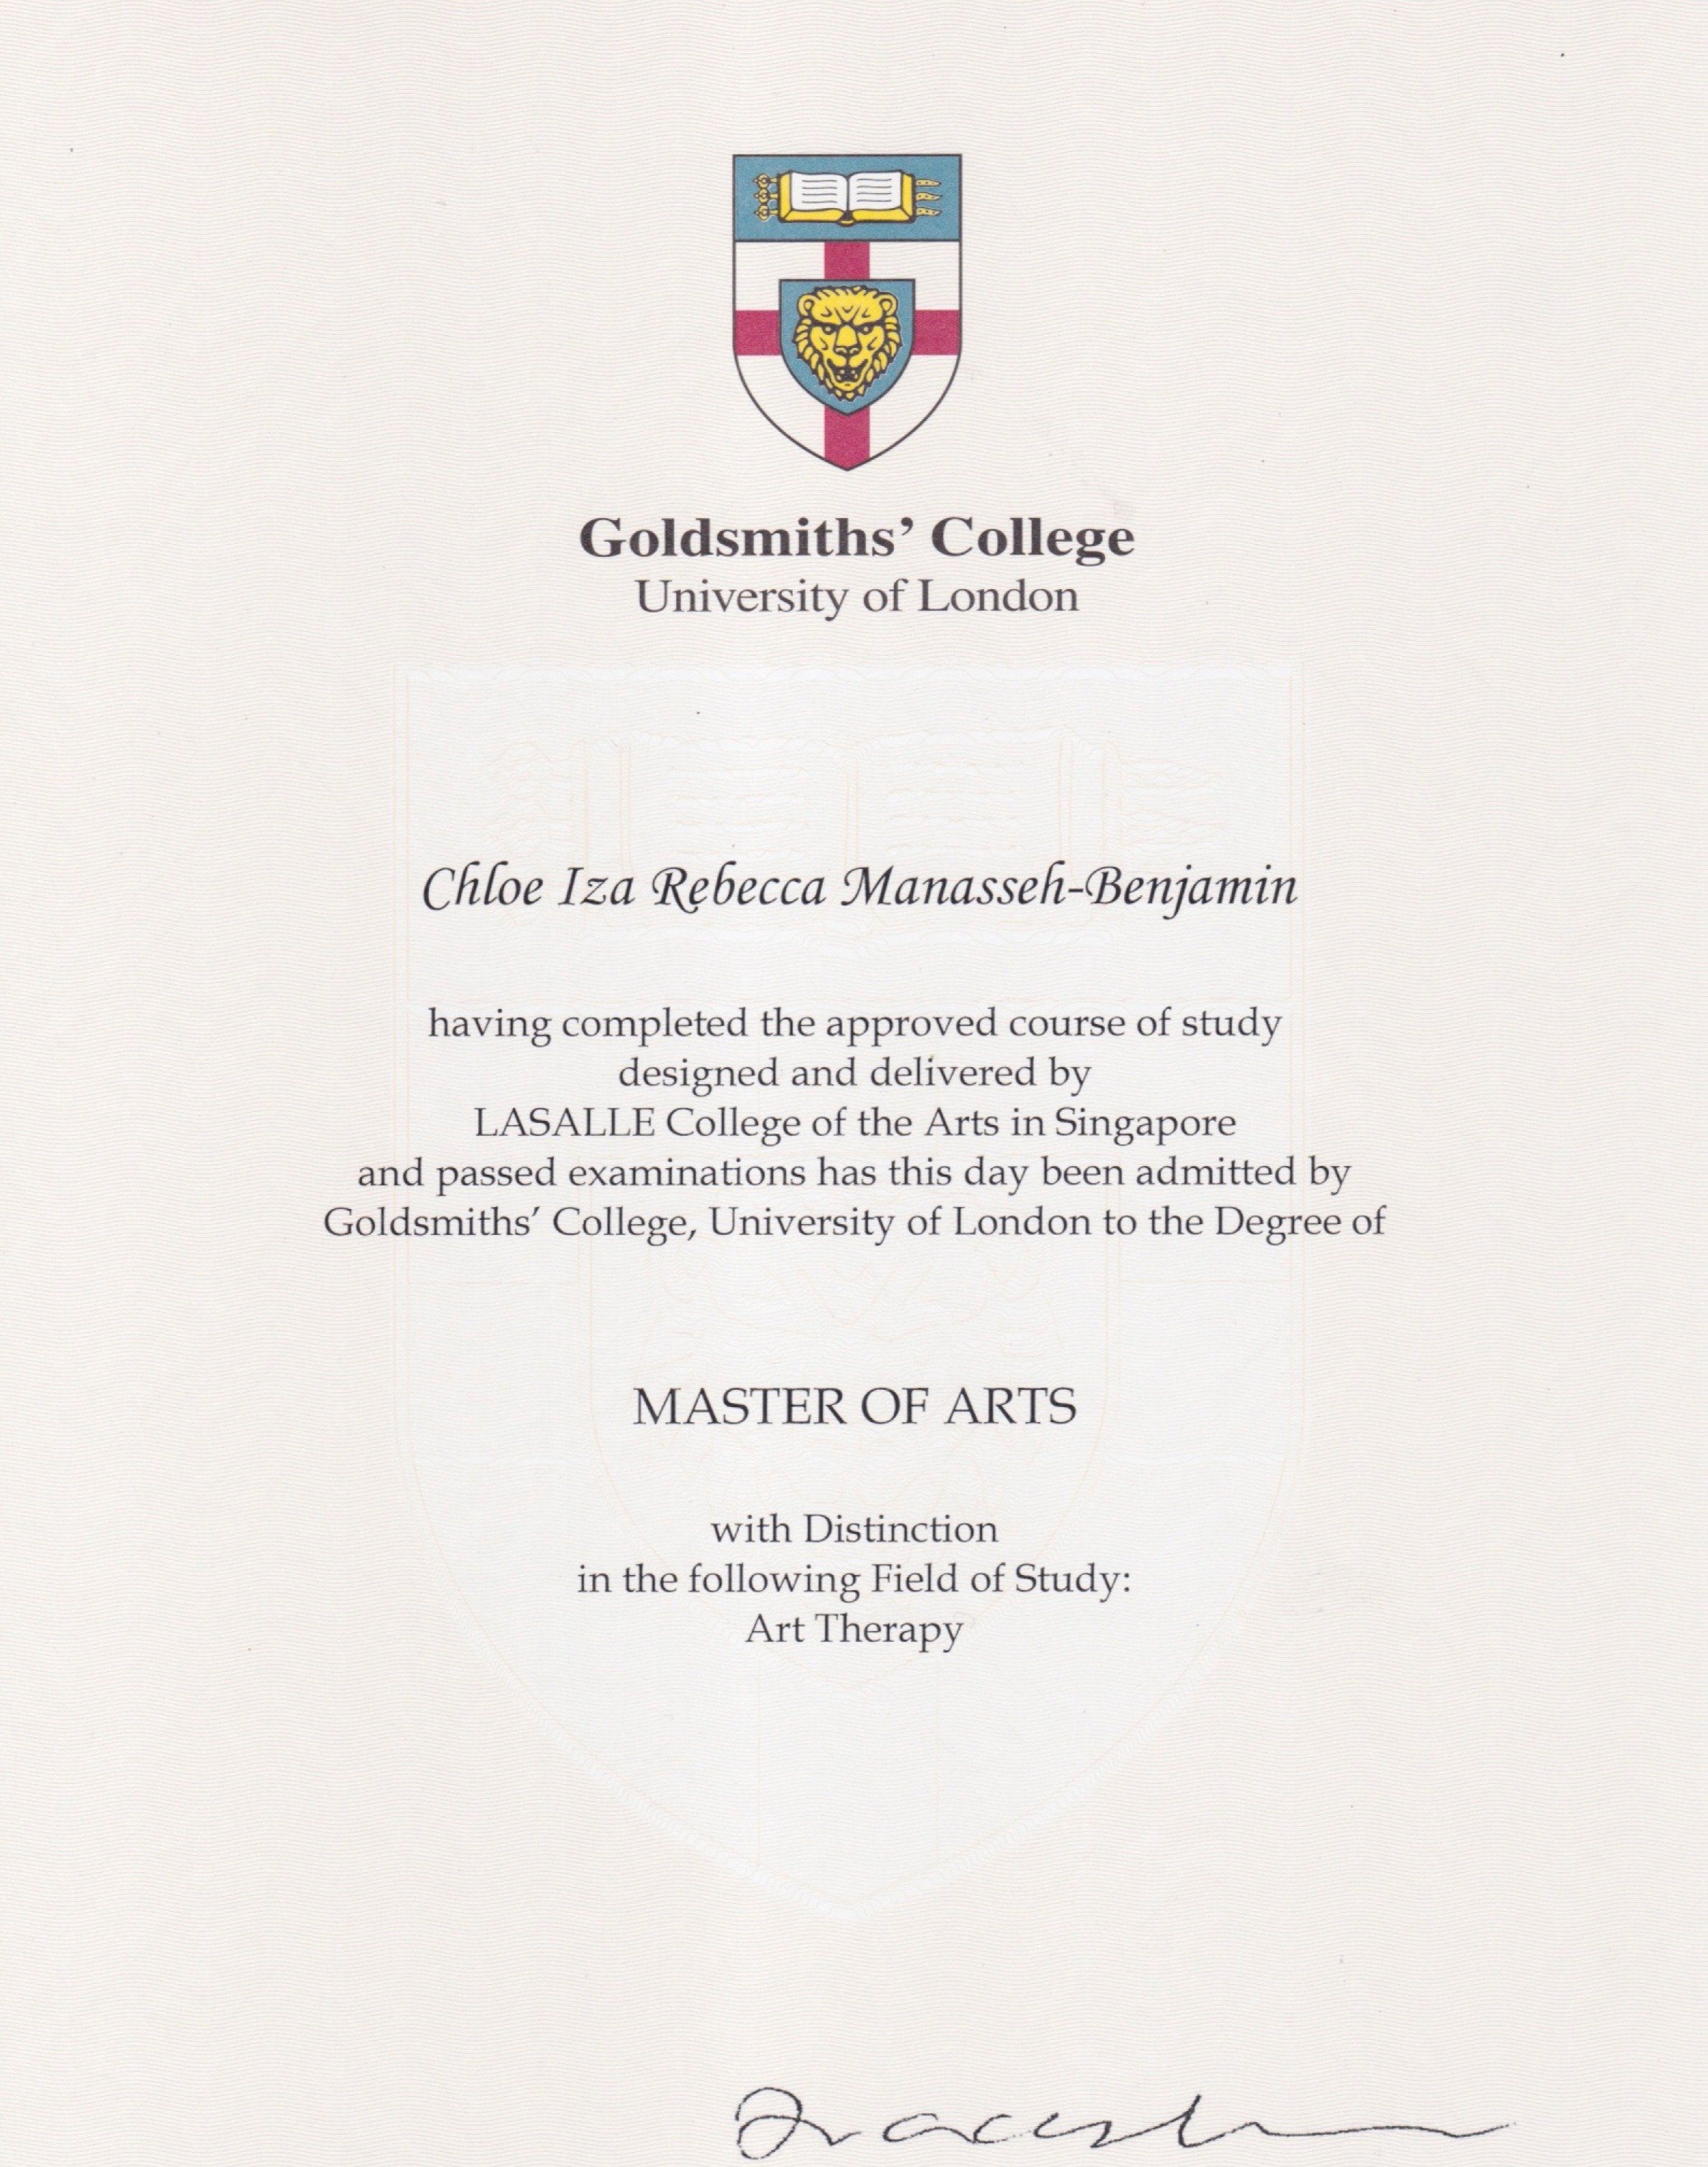 Goldsmith's College University of London Master of Arts in Art Therapy